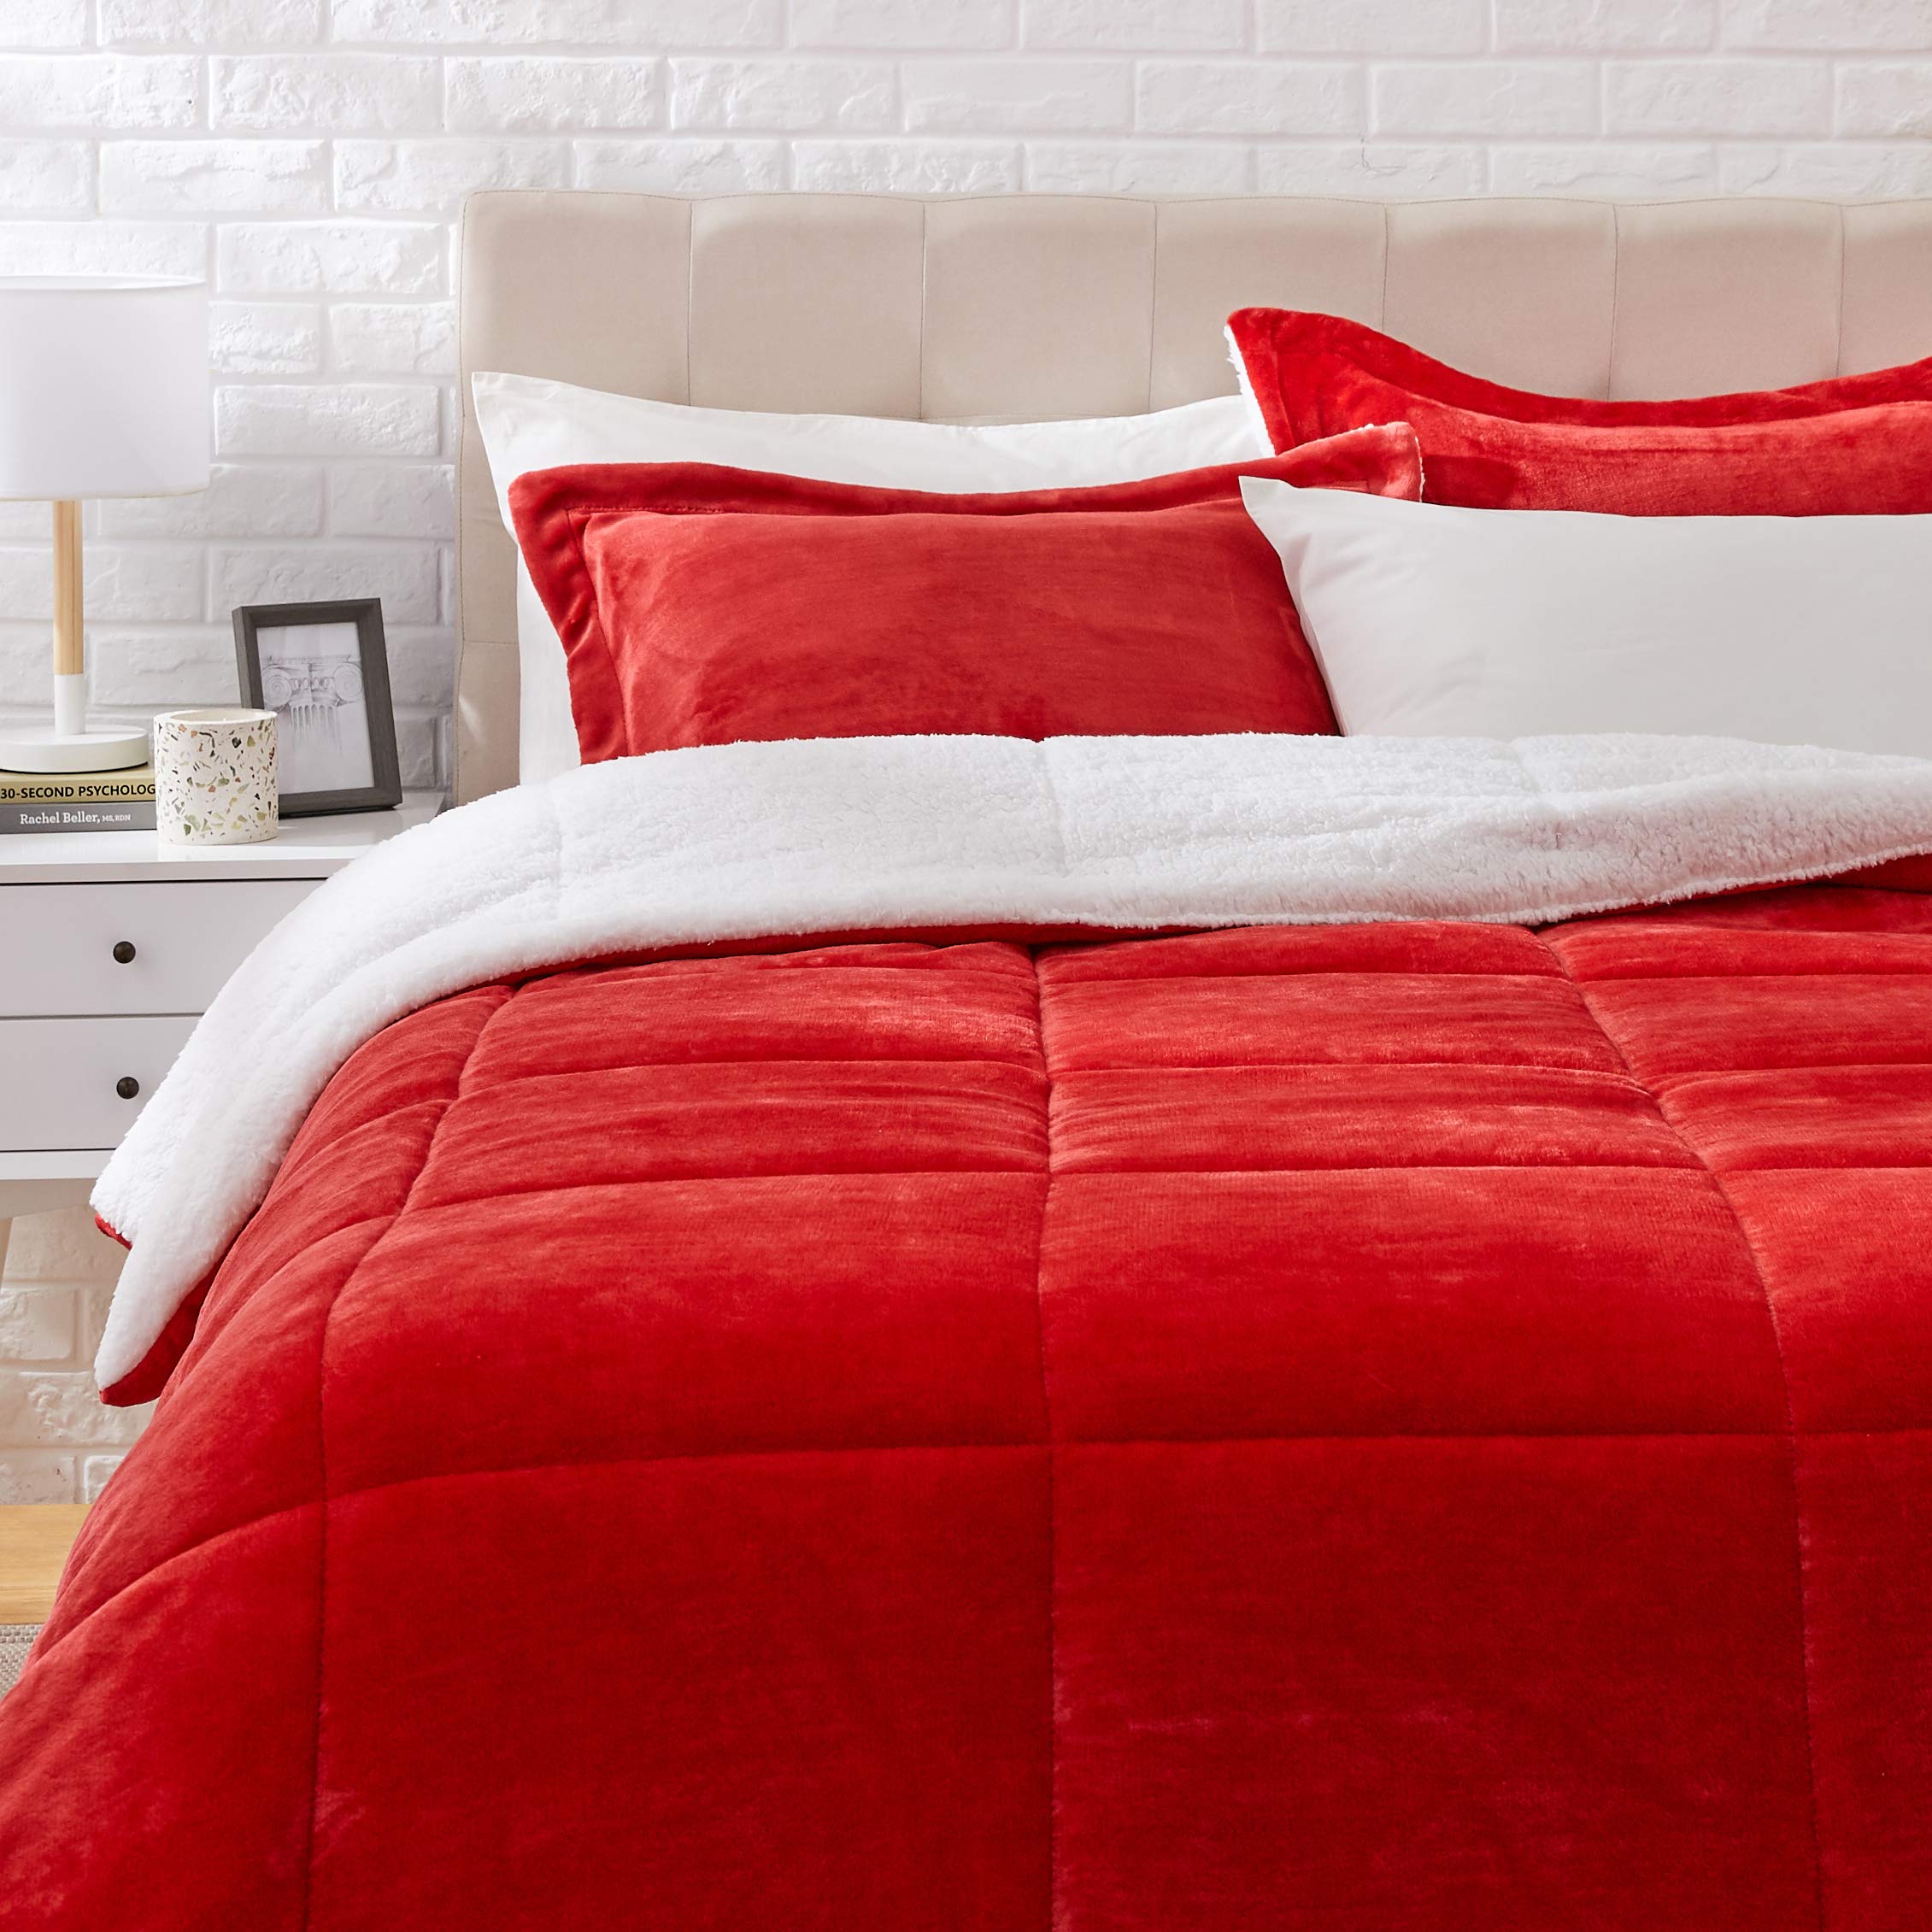 Book Cover Amazon Basics Ultra-Soft Micromink Sherpa 3 Piece Comforter Bed Set, King, Red, Solid Red King